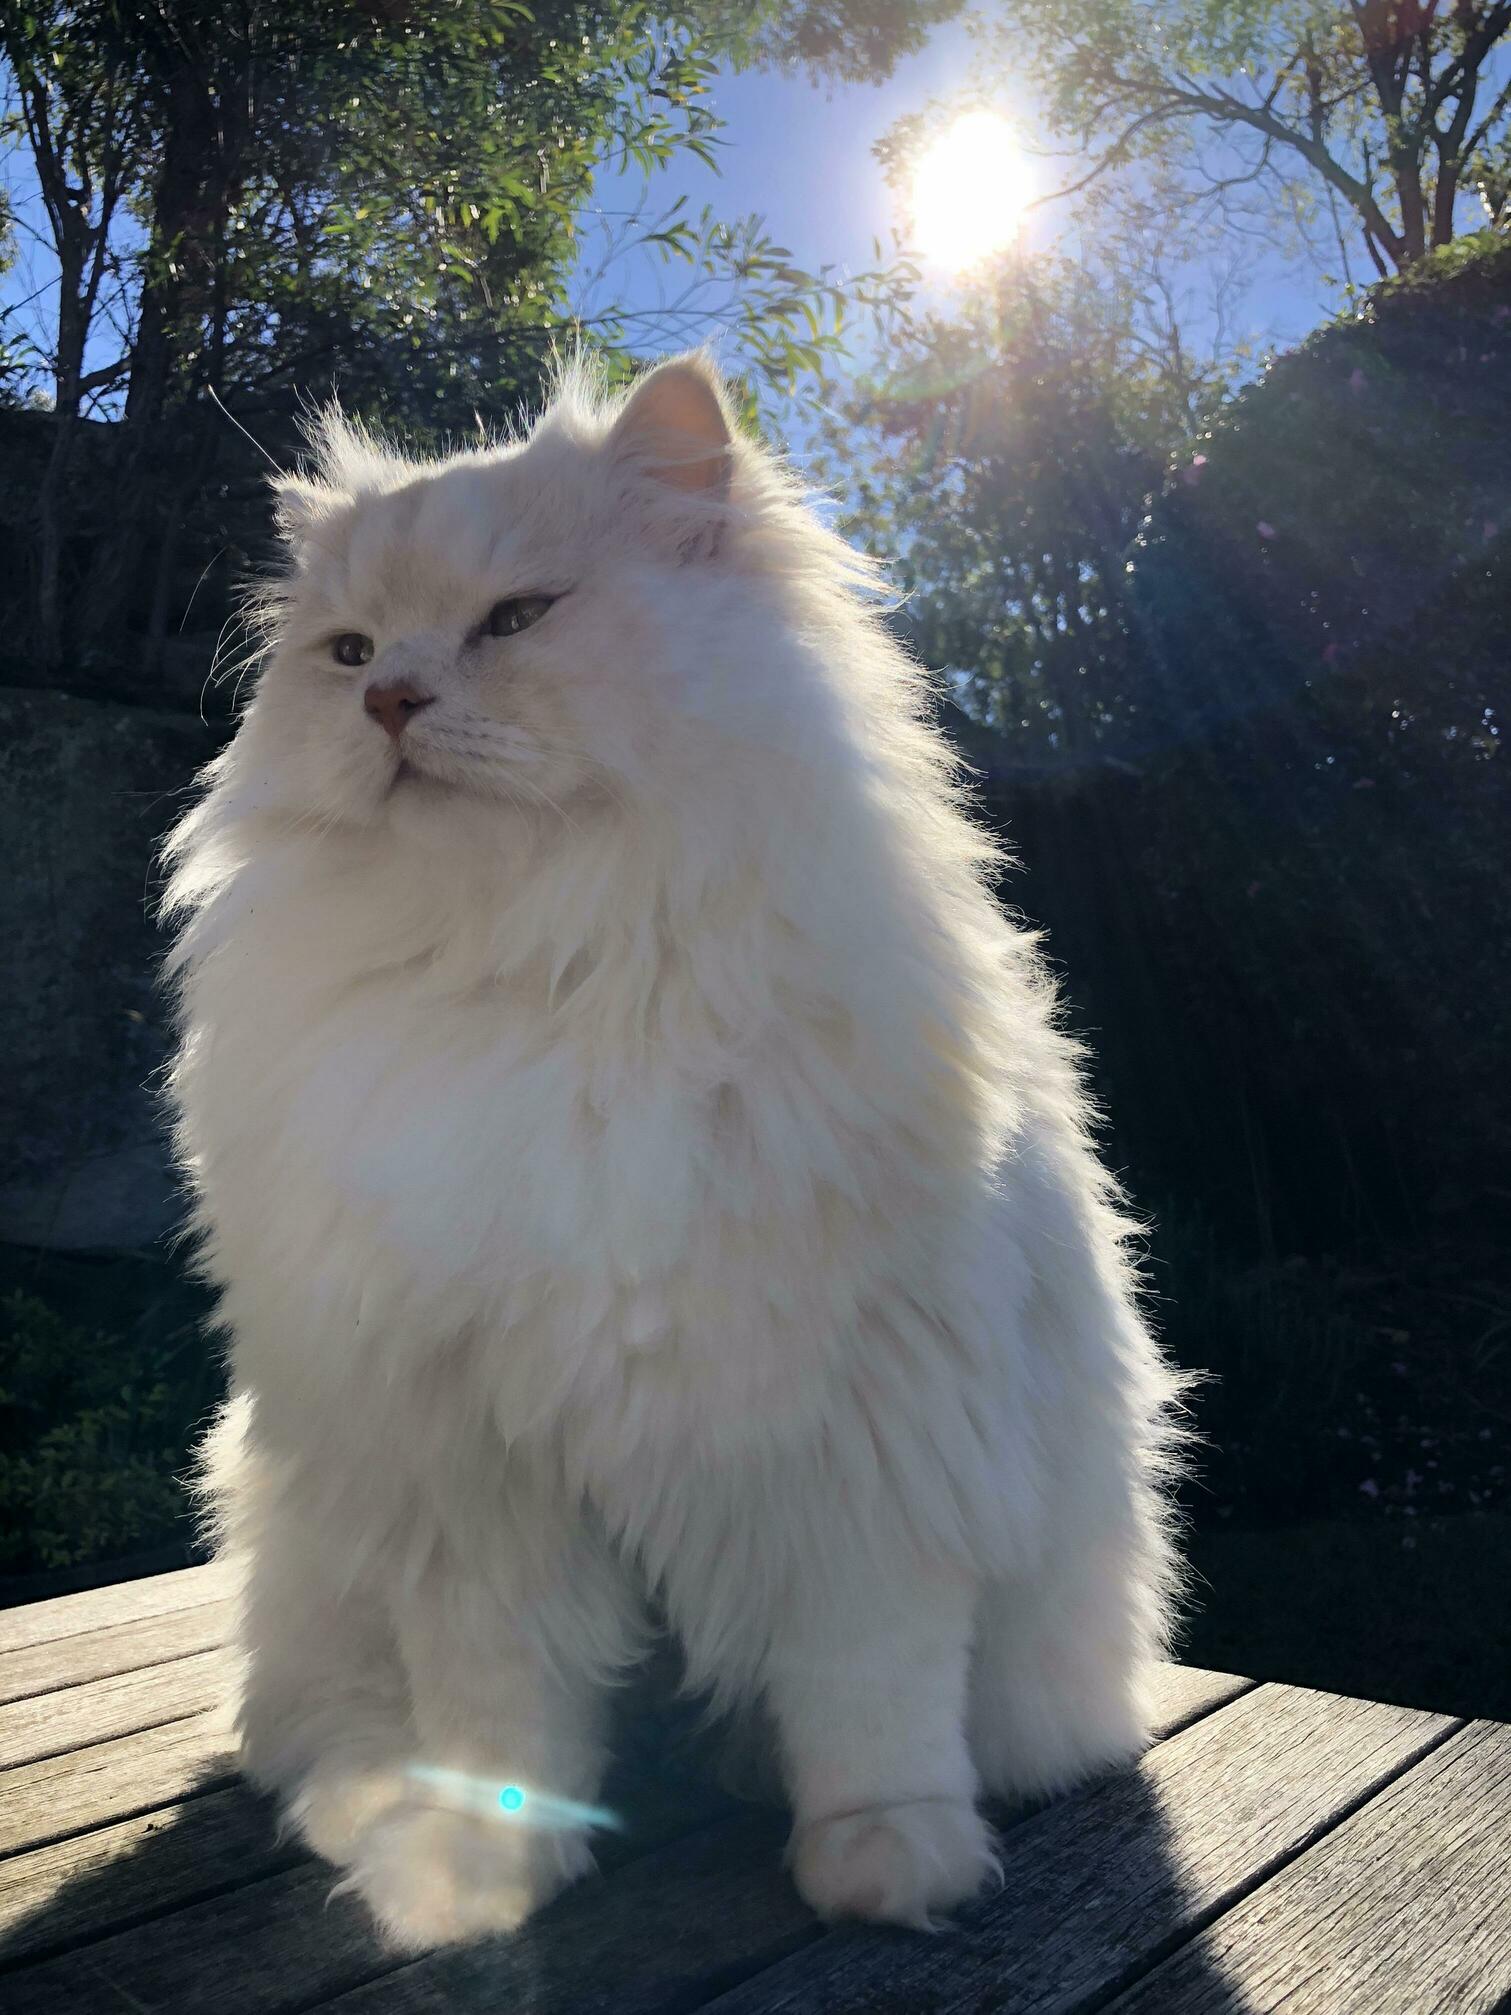 Looking after majestic mac, while her humans are away